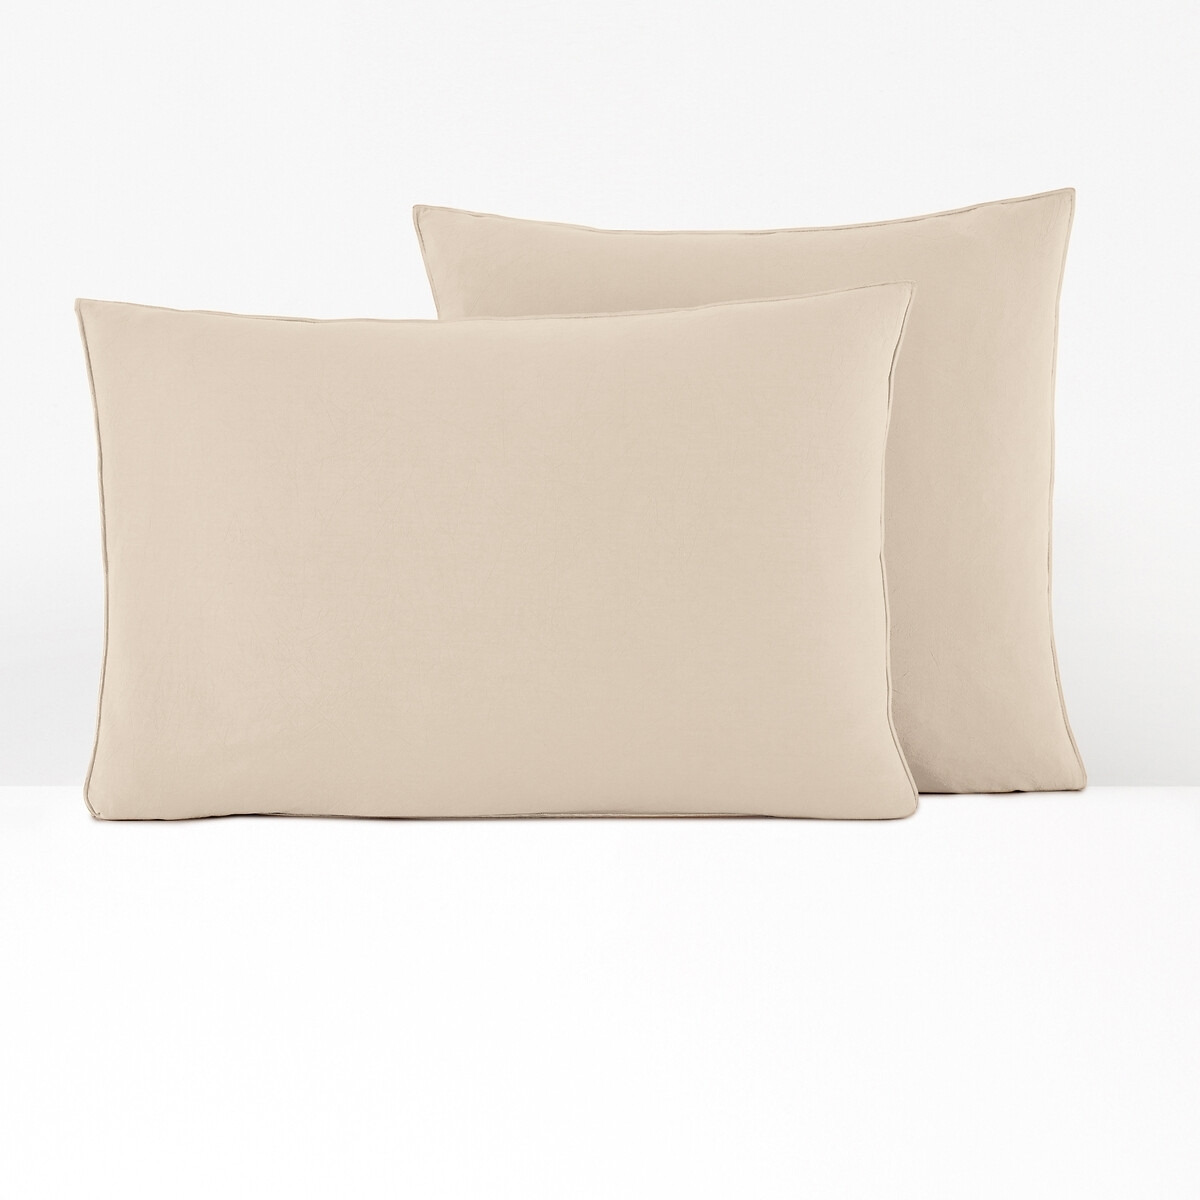 Erwin 50% Recycled Cotton Pillowcase - image 1